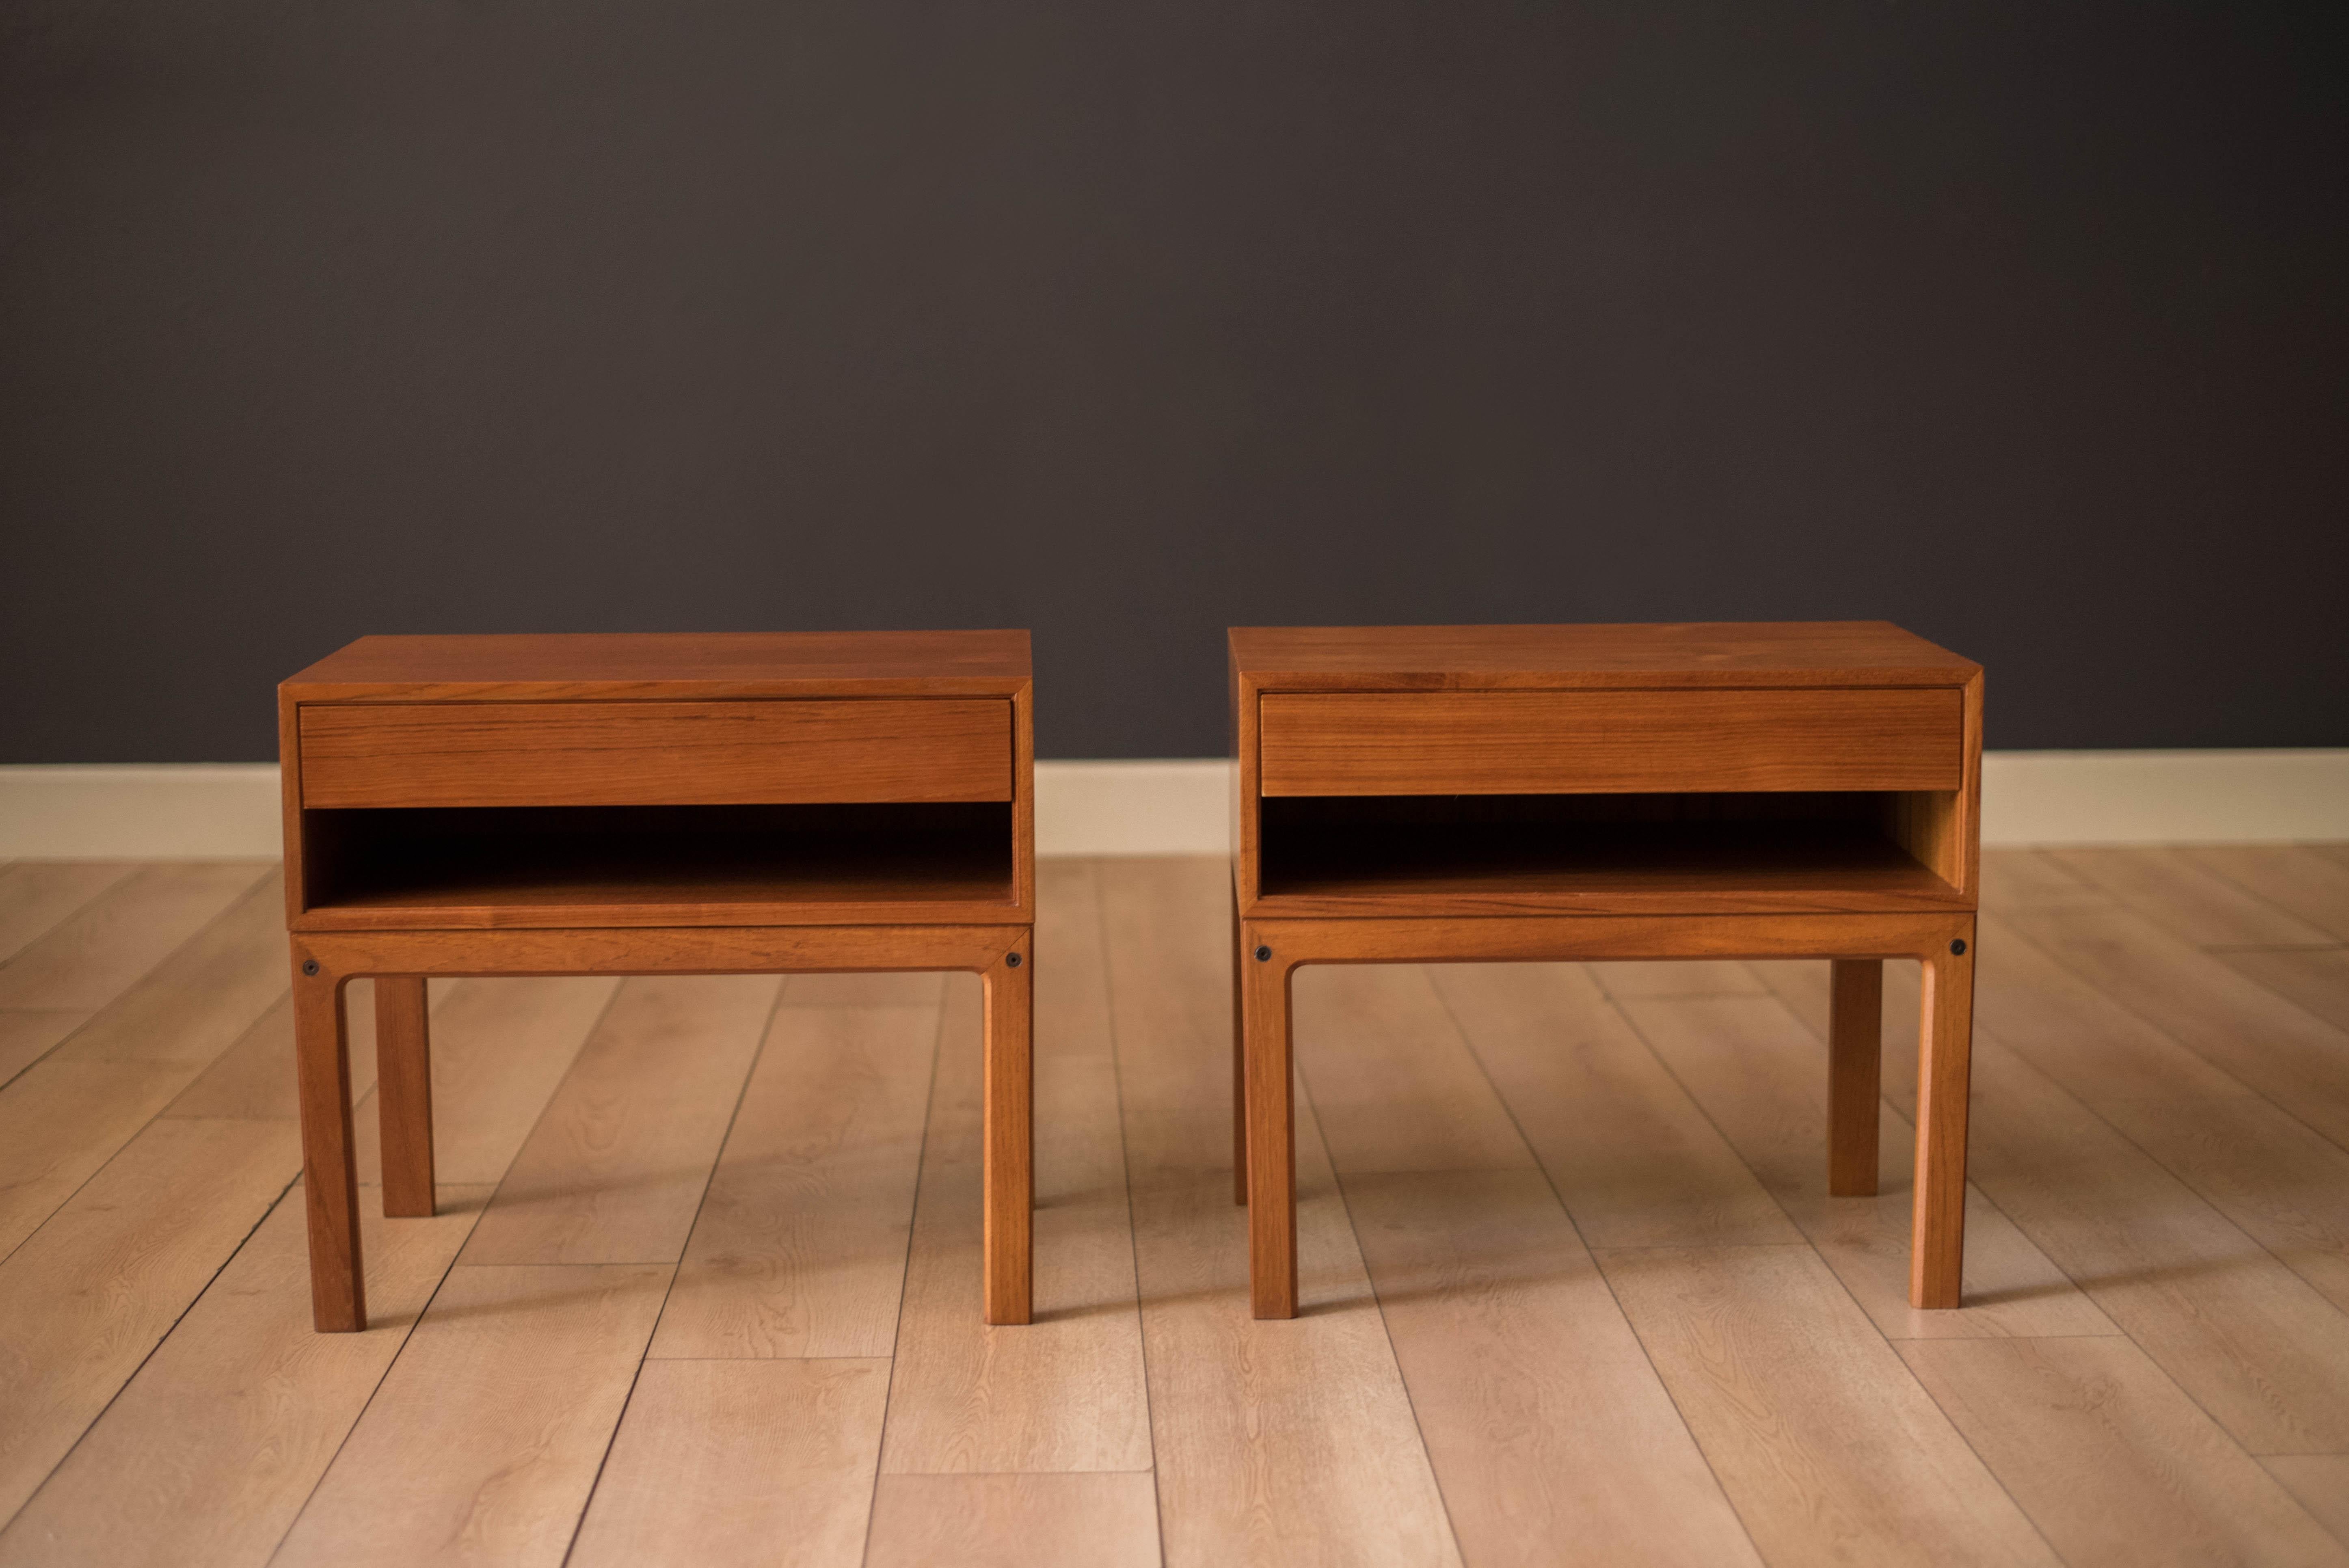 Mid century modern pair of bedside table nightstands in teak designed by Arne Wahl Iversen for Vinde Møbelfabrik, circa 1960's. This set features dovetail constructed drawers and an open shelf compartment for extra storage. Price is for the set of